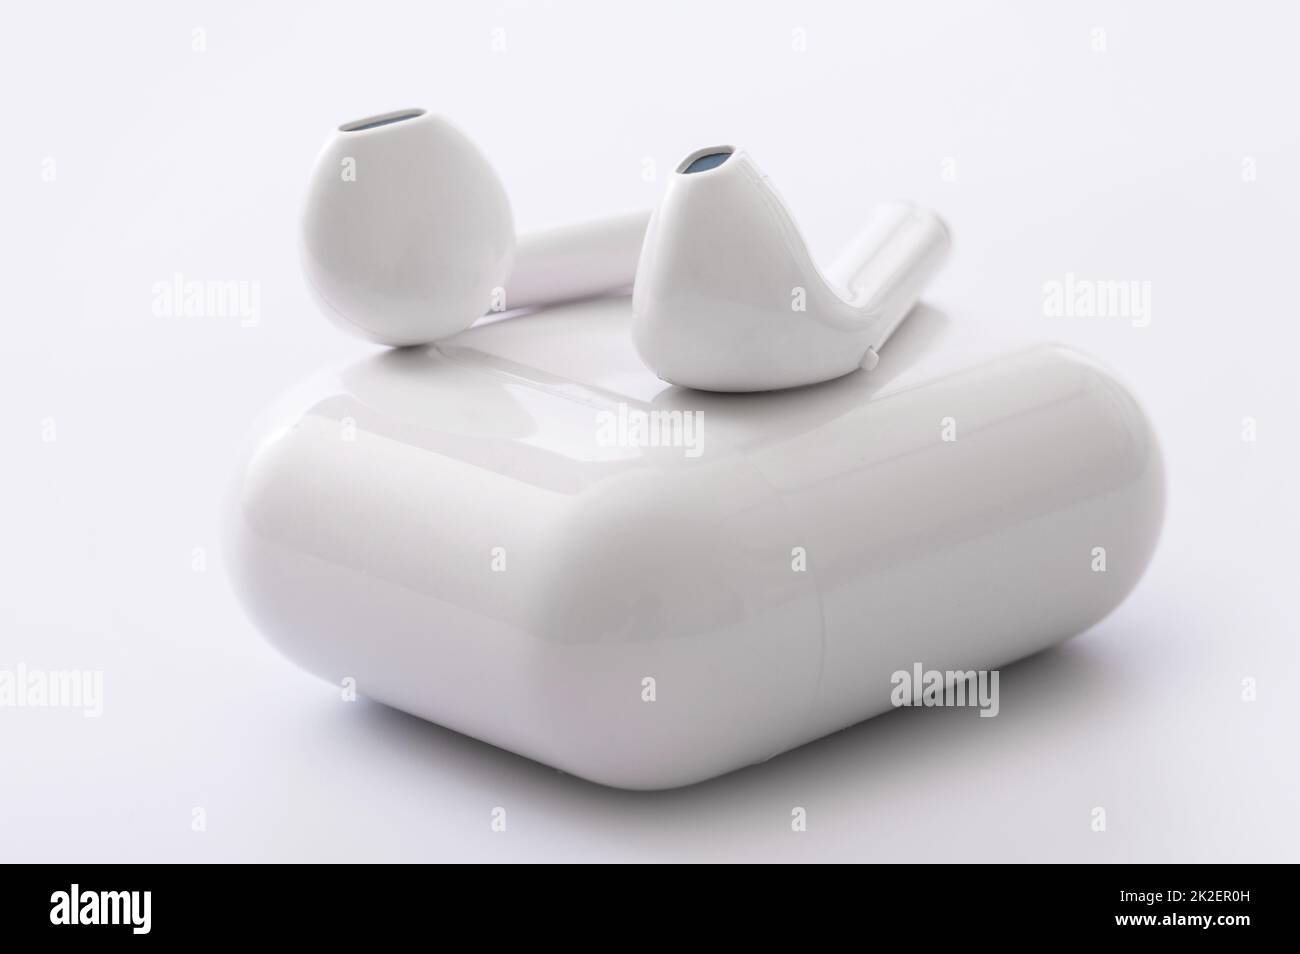 White wireless earphones with a charging box Stock Photo